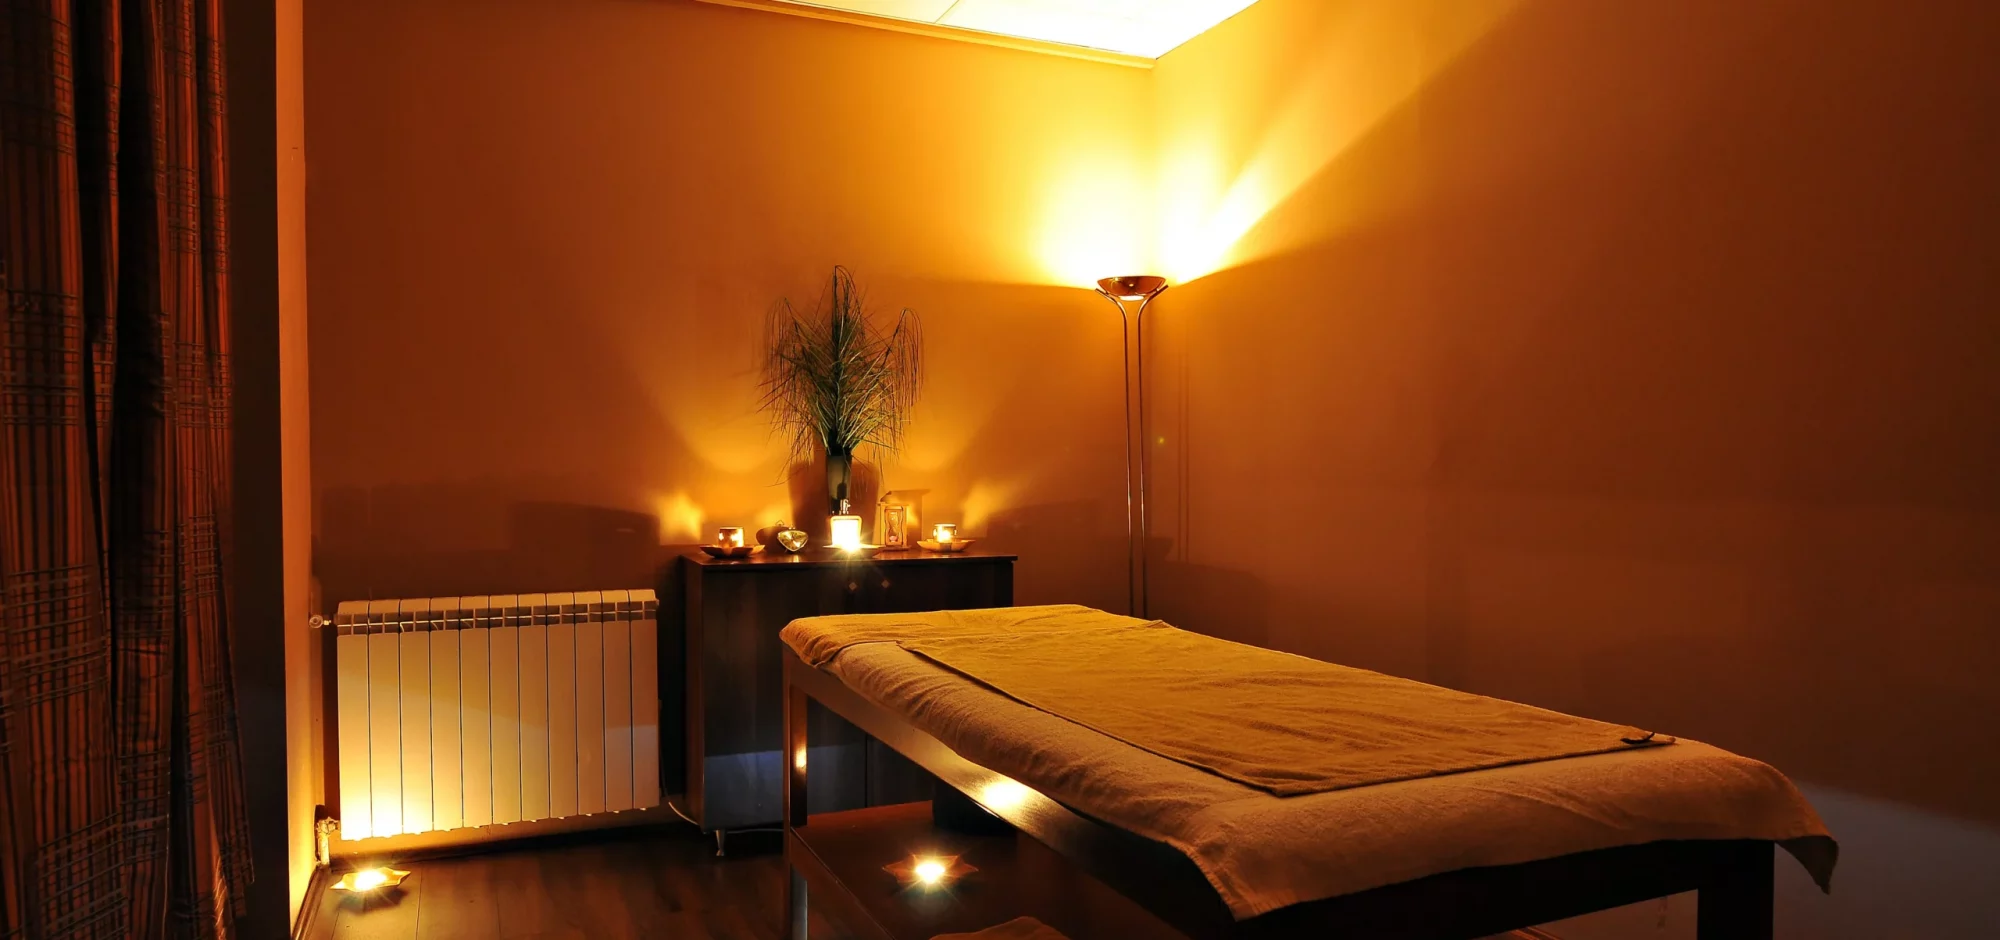 10 Home Massage Room Ideas for 2022